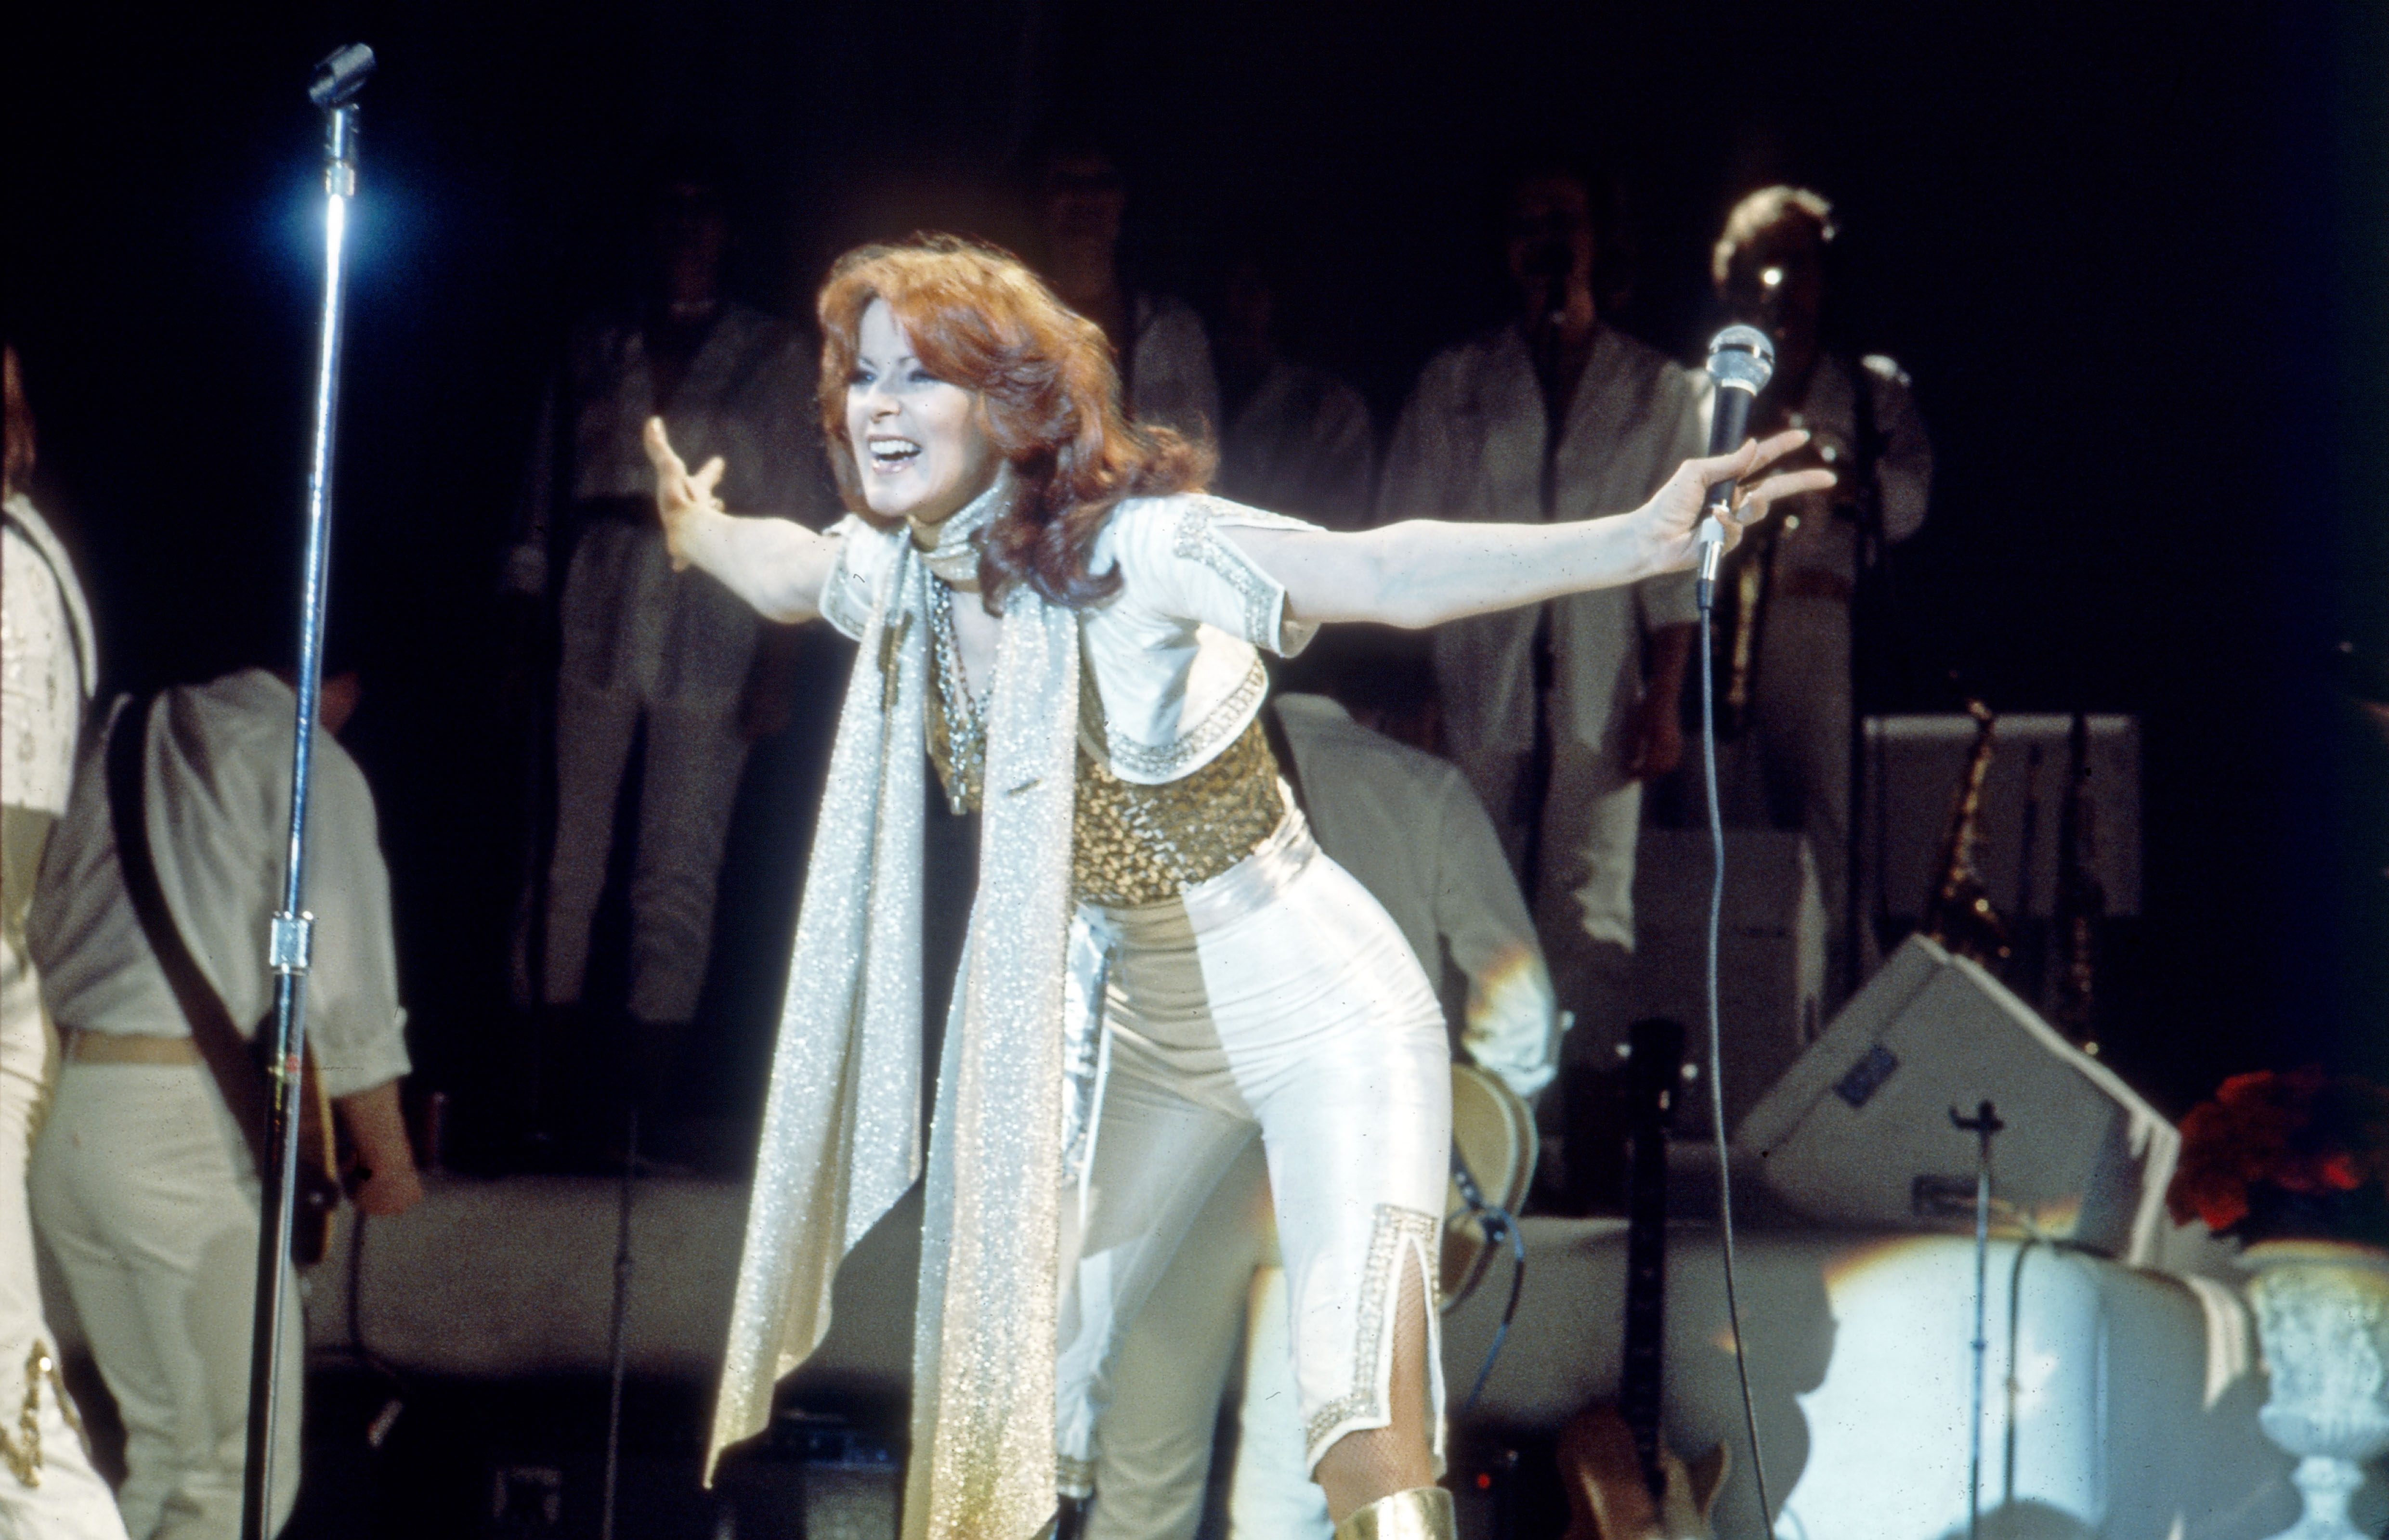 Anni-Frid Lyngstad from the Swedish pop group ABBA at the concert in Hamburg on February 10, 1977. | Source: Getty Images